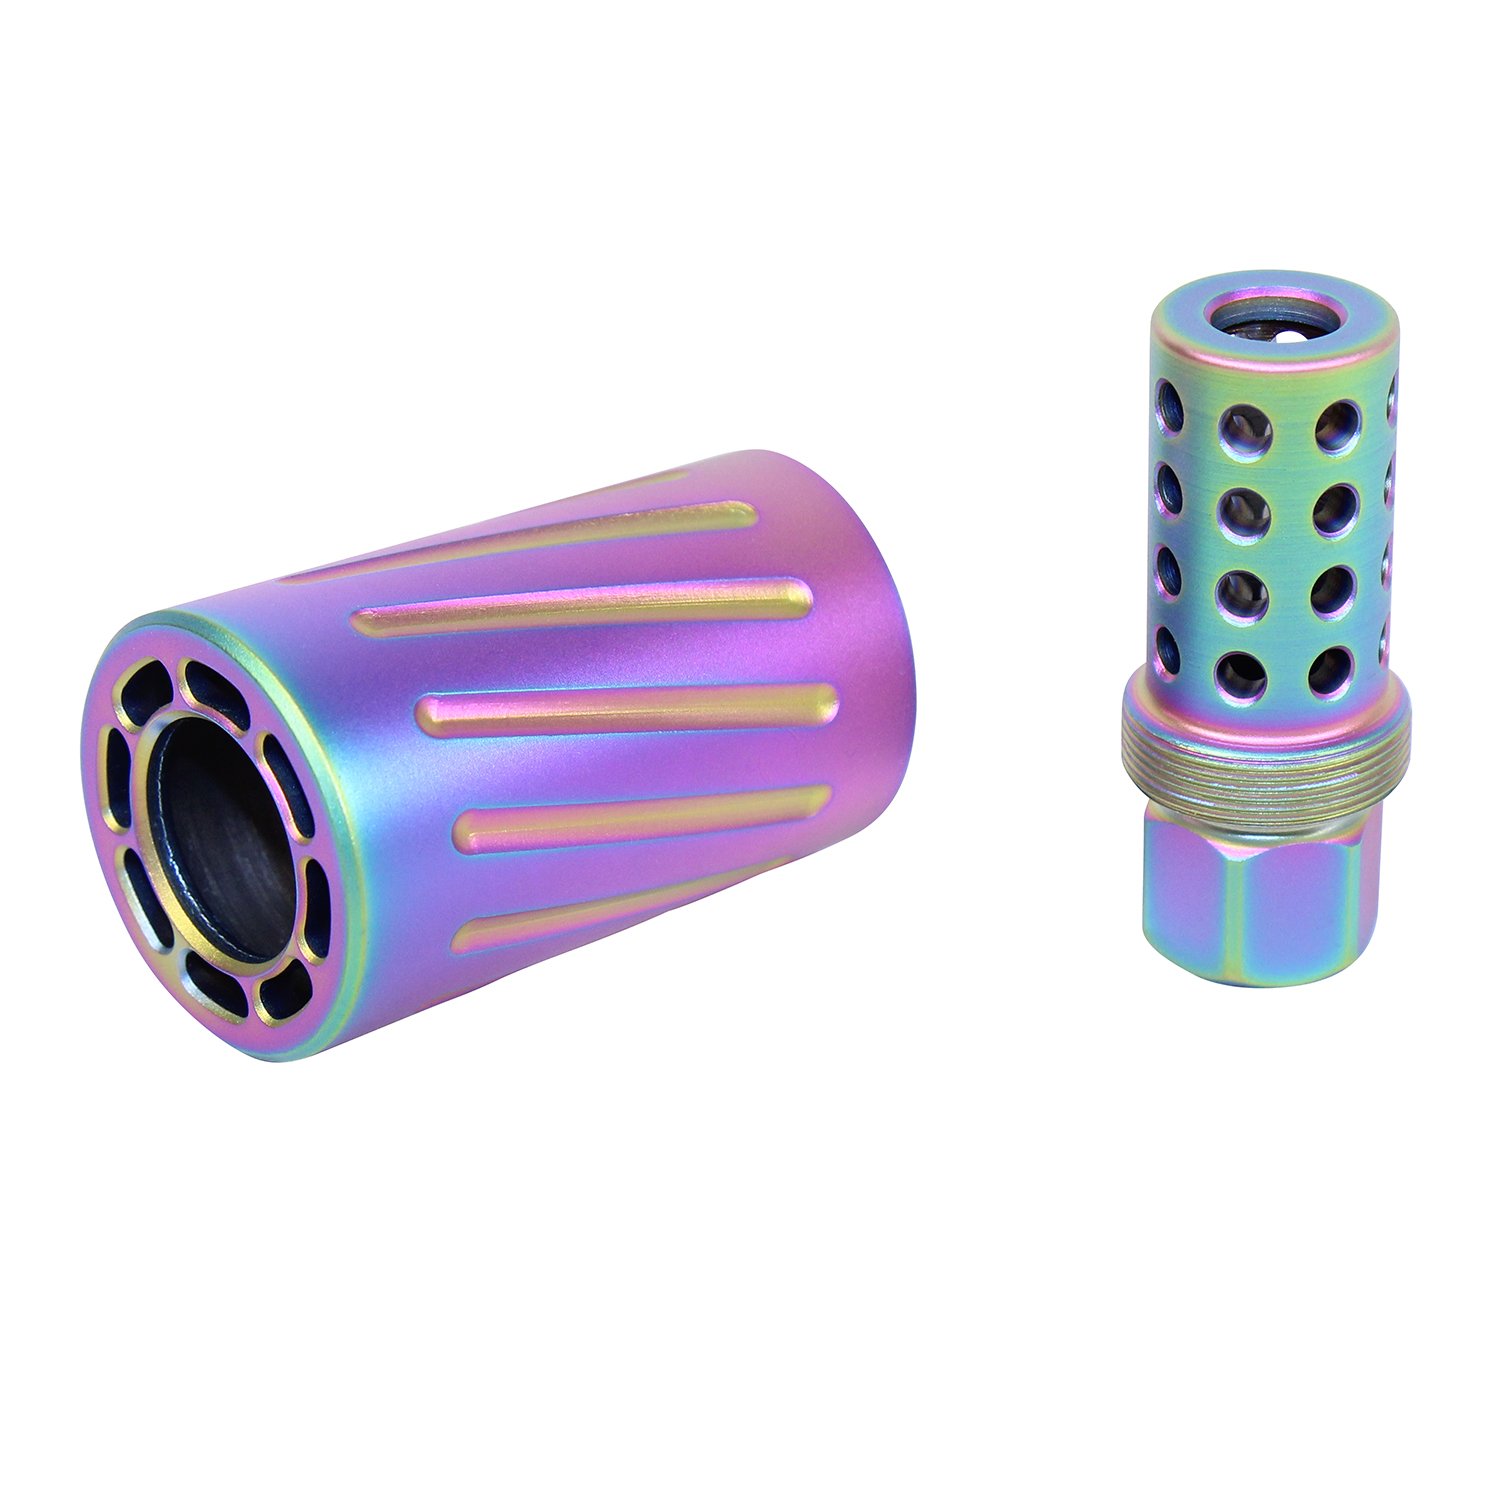 AR-15 muzzle compensator and blast shield with color-shifting rainbow PVD coat